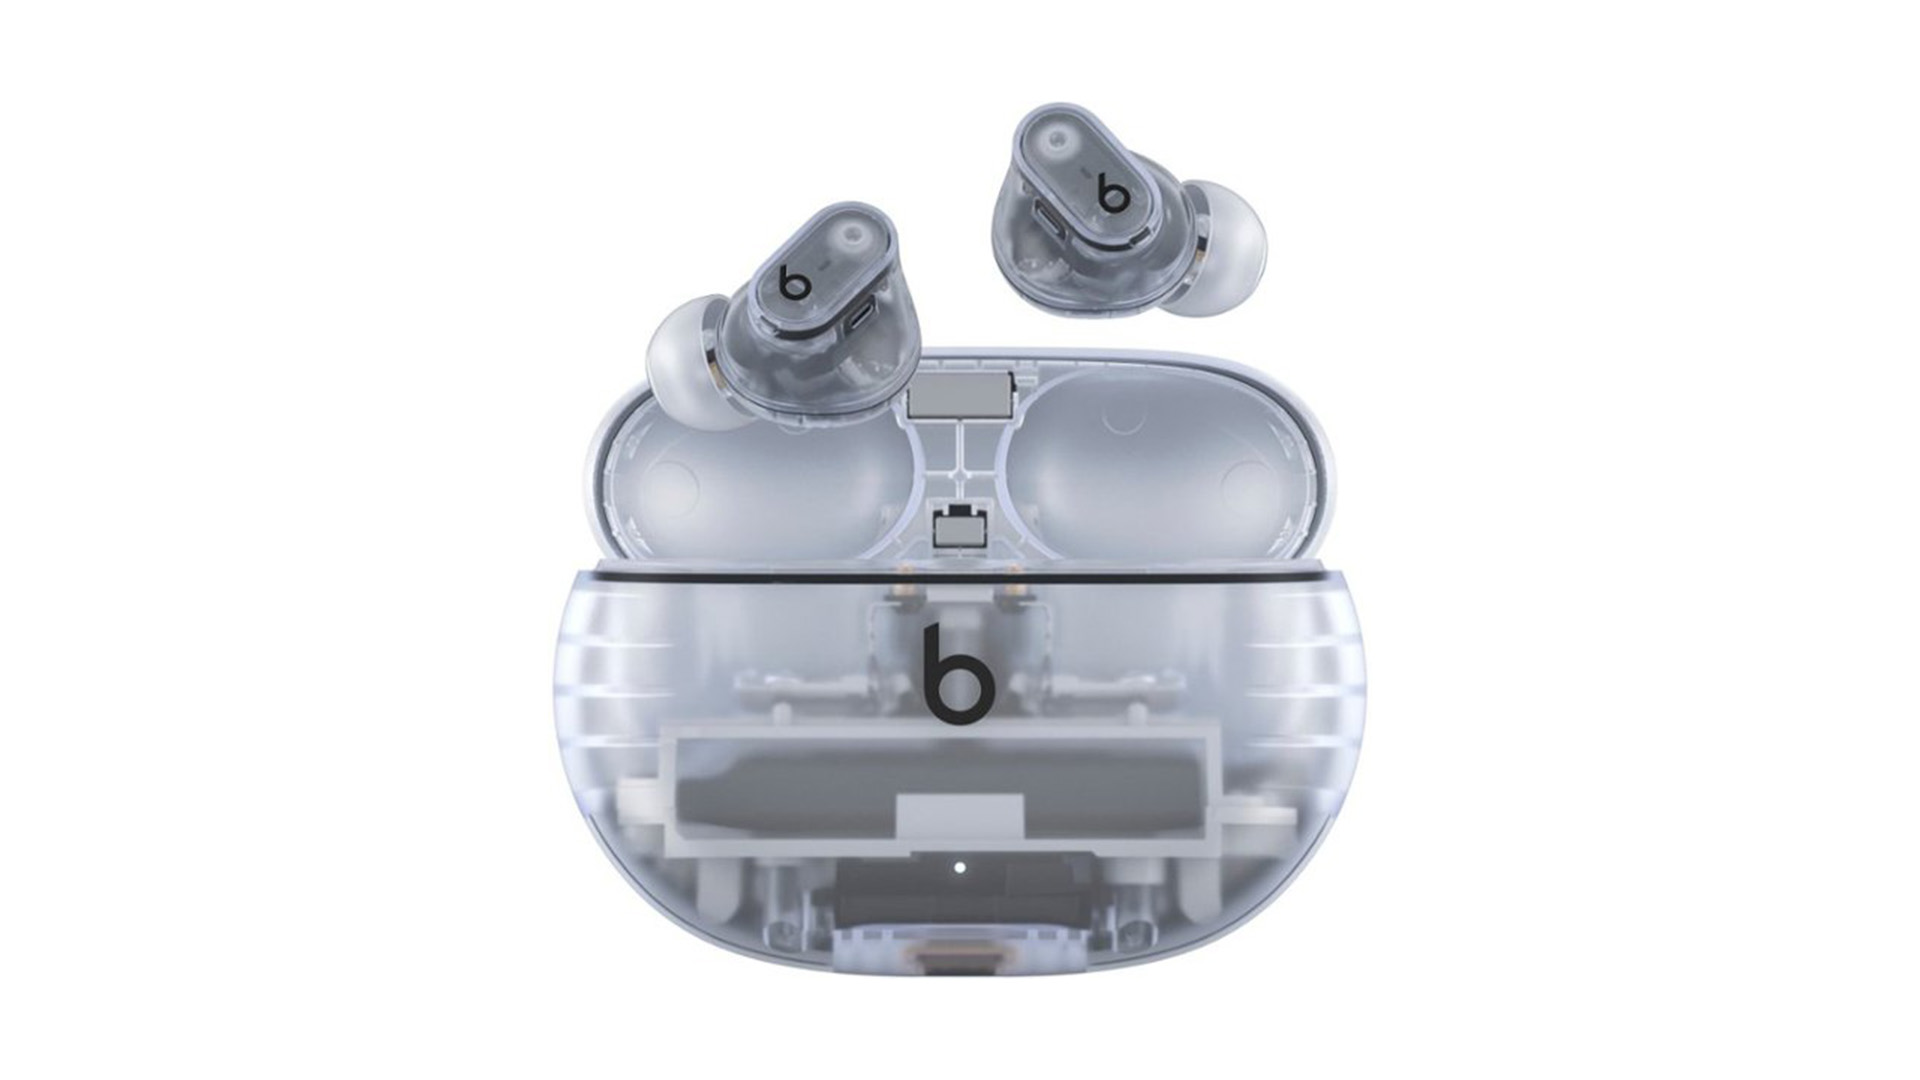 Pick up a pair of excellent Beats earbuds for under $130